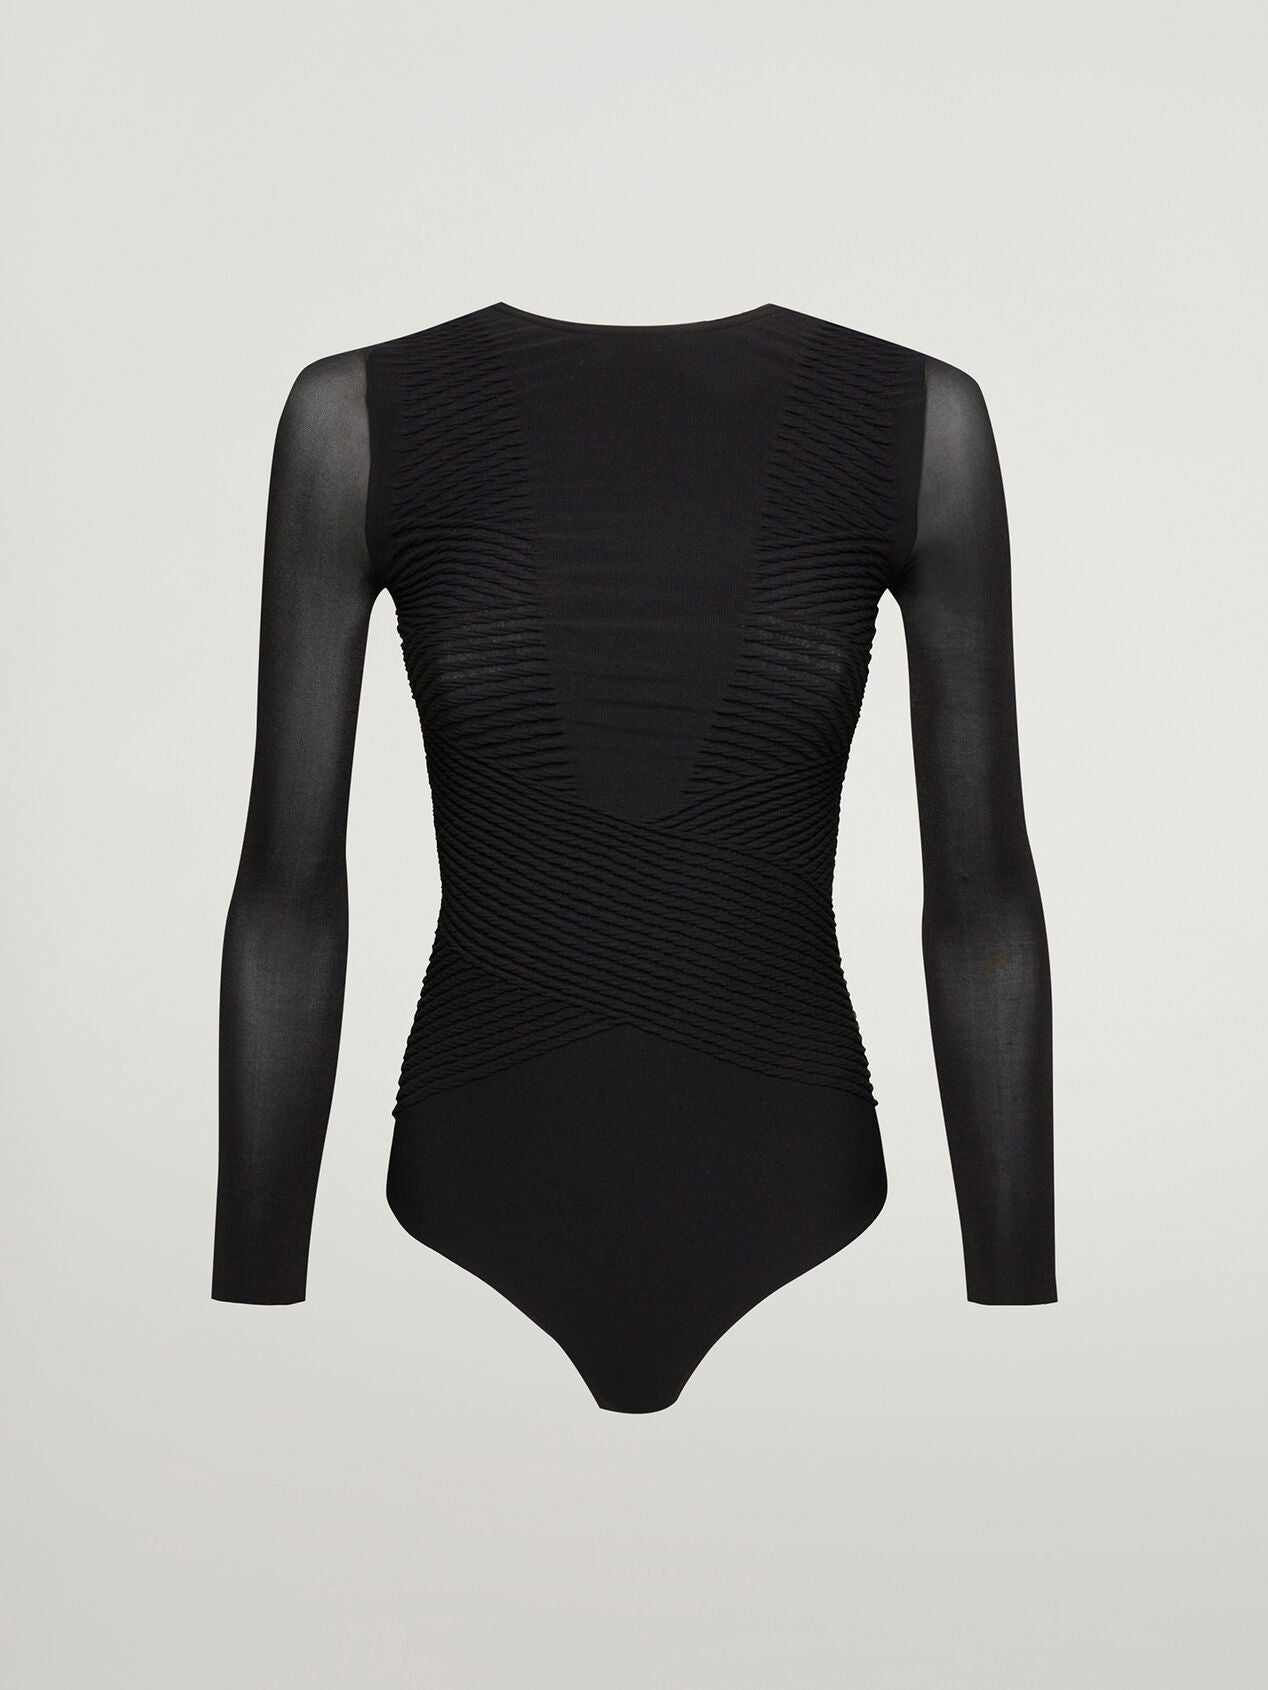 White String Bodysuit by Wolford on Sale